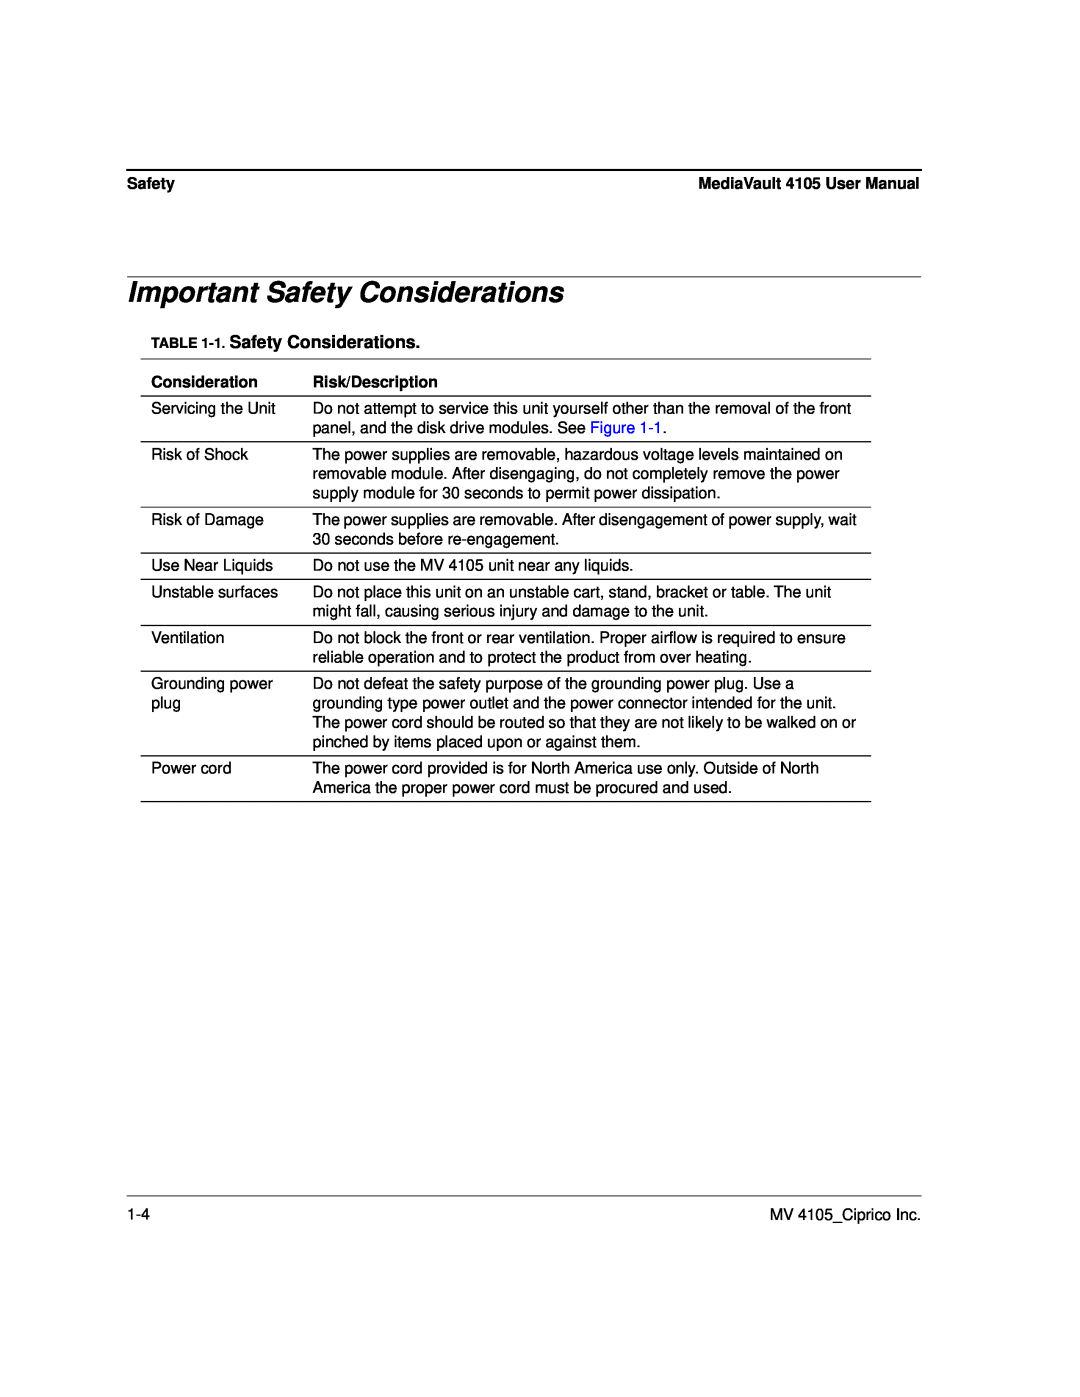 Ciprico 4105 Series user manual Important Safety Considerations, 1. Safety Considerations 